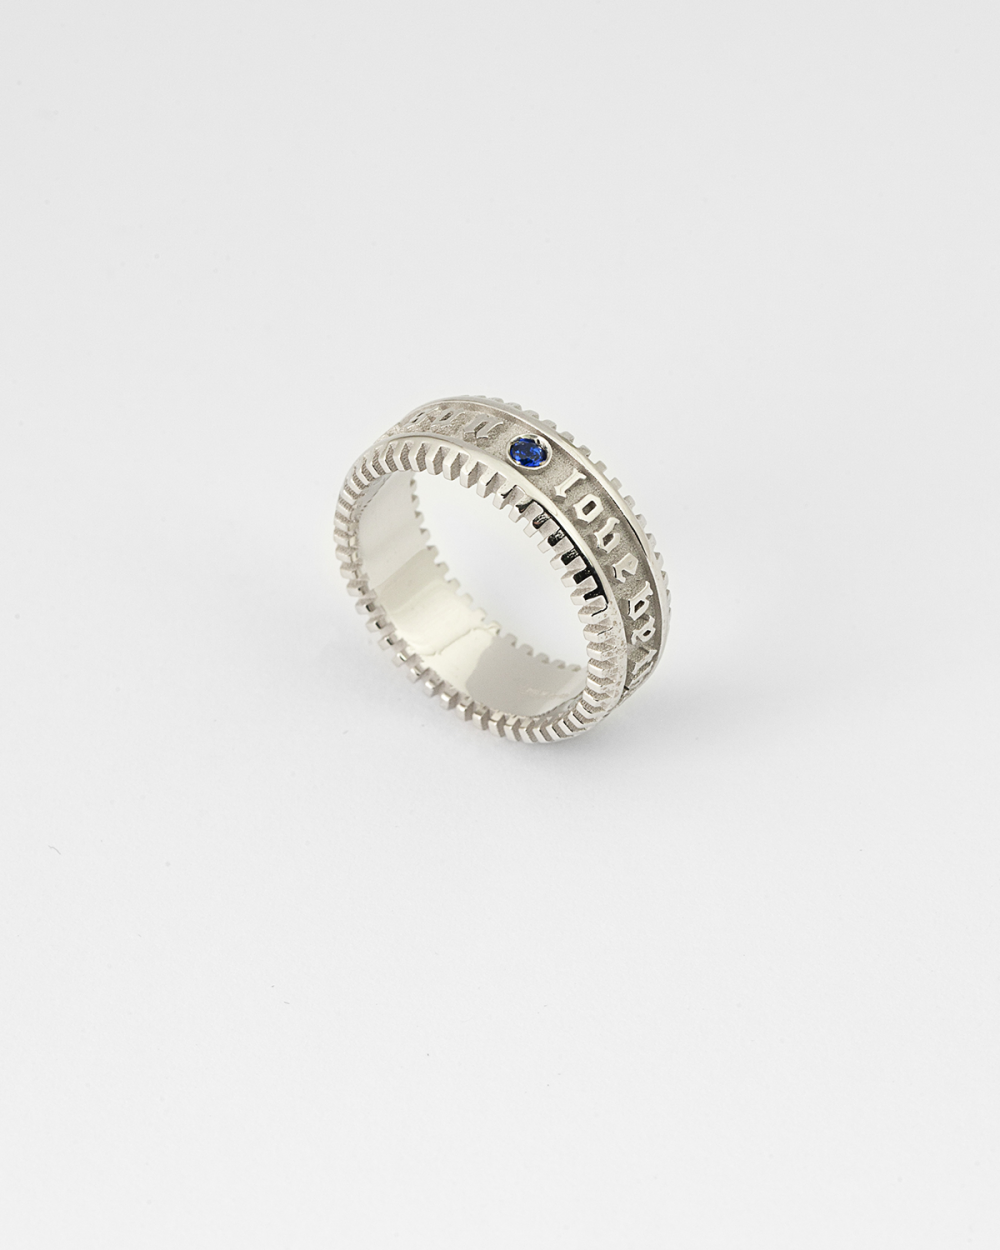 SILVER THE FORTUNE BAND RING WITH BLU...